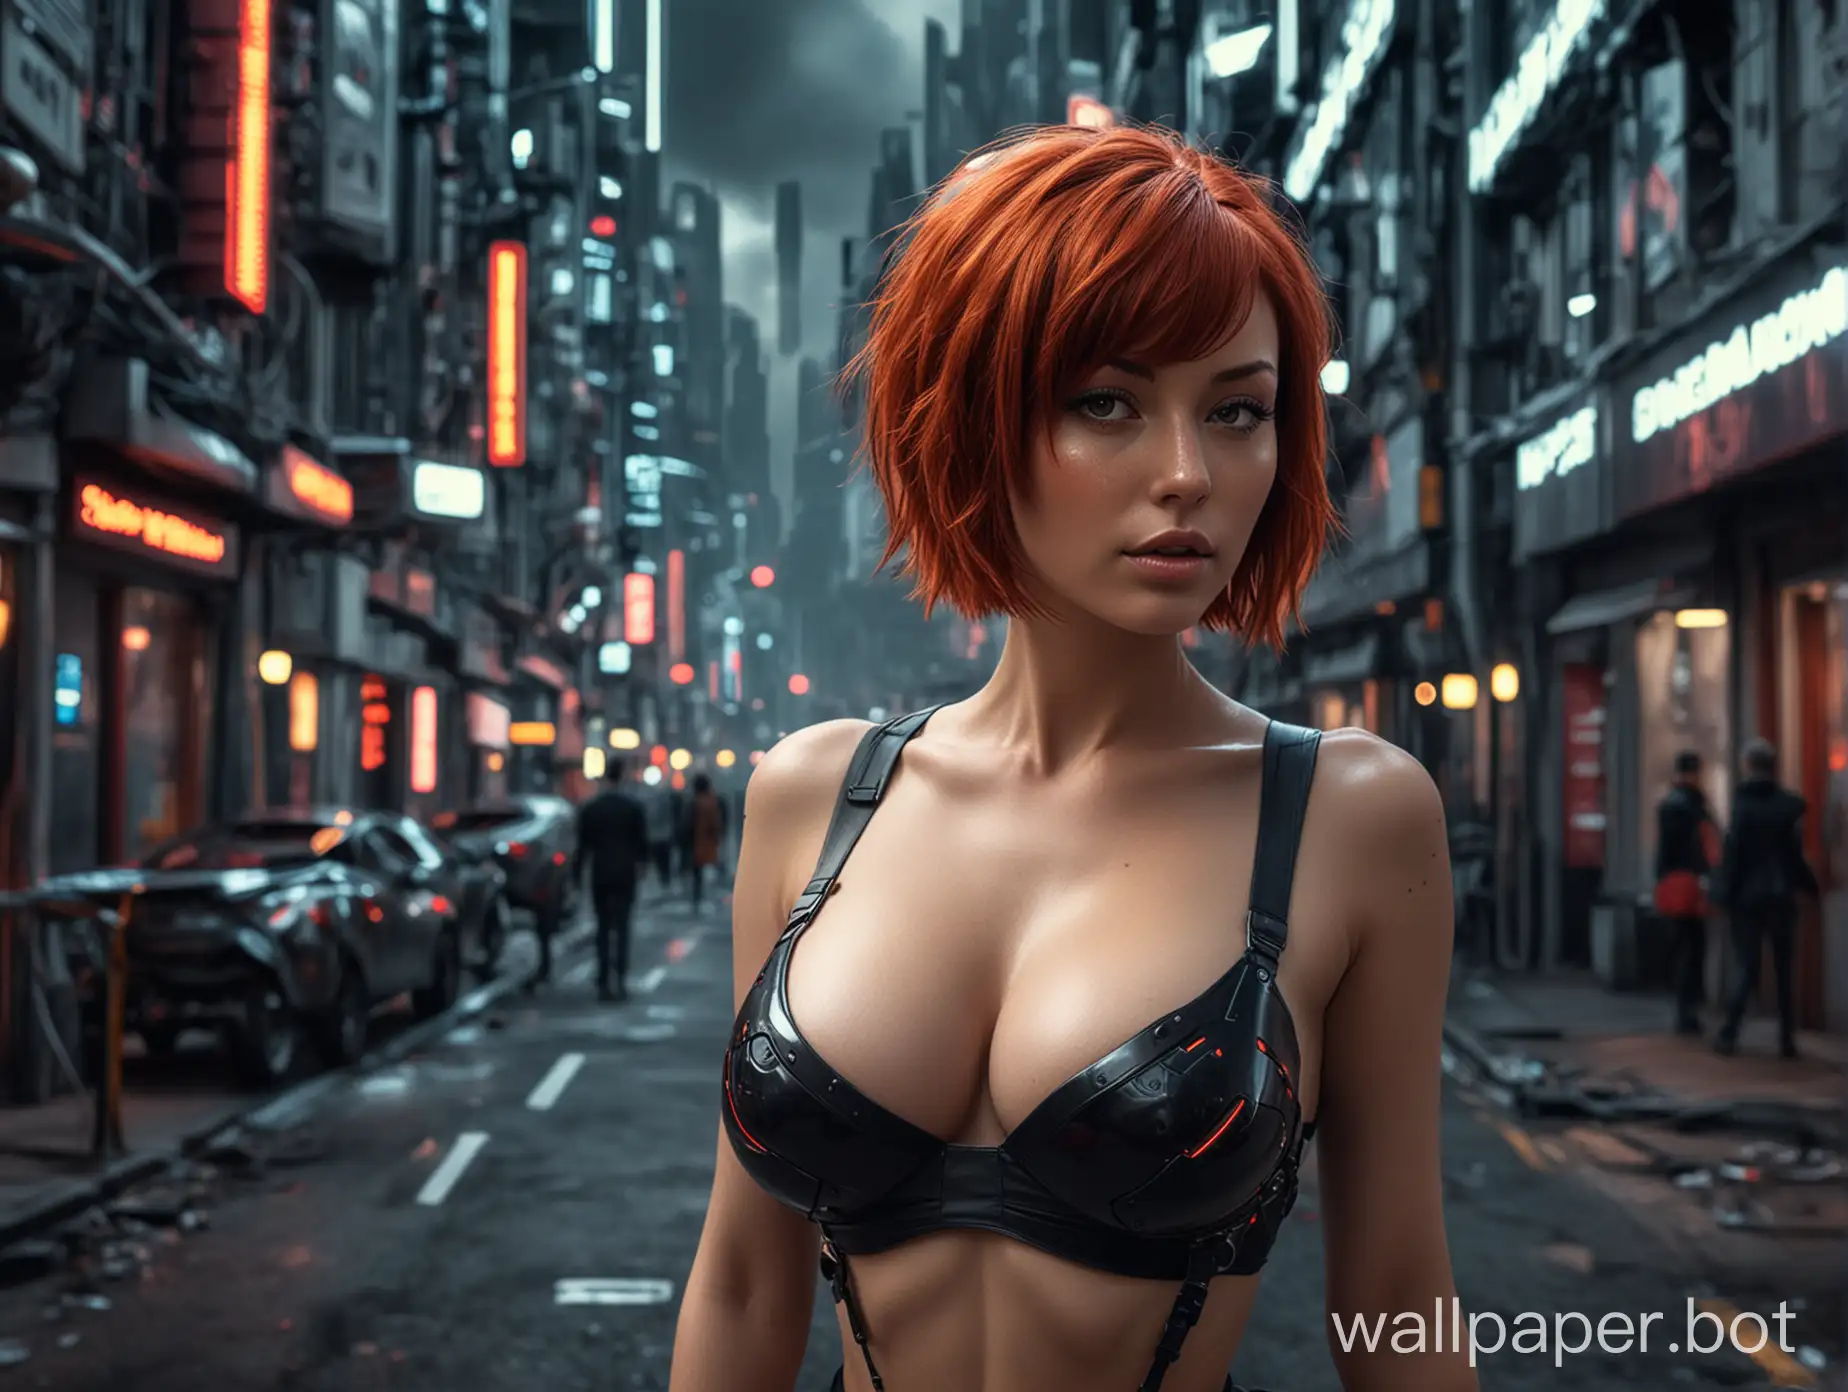 Beautiful sexy girl with short red hair, big breasts, walking down the street of the city of the future, futuristic design, cyberpunk style, dark background